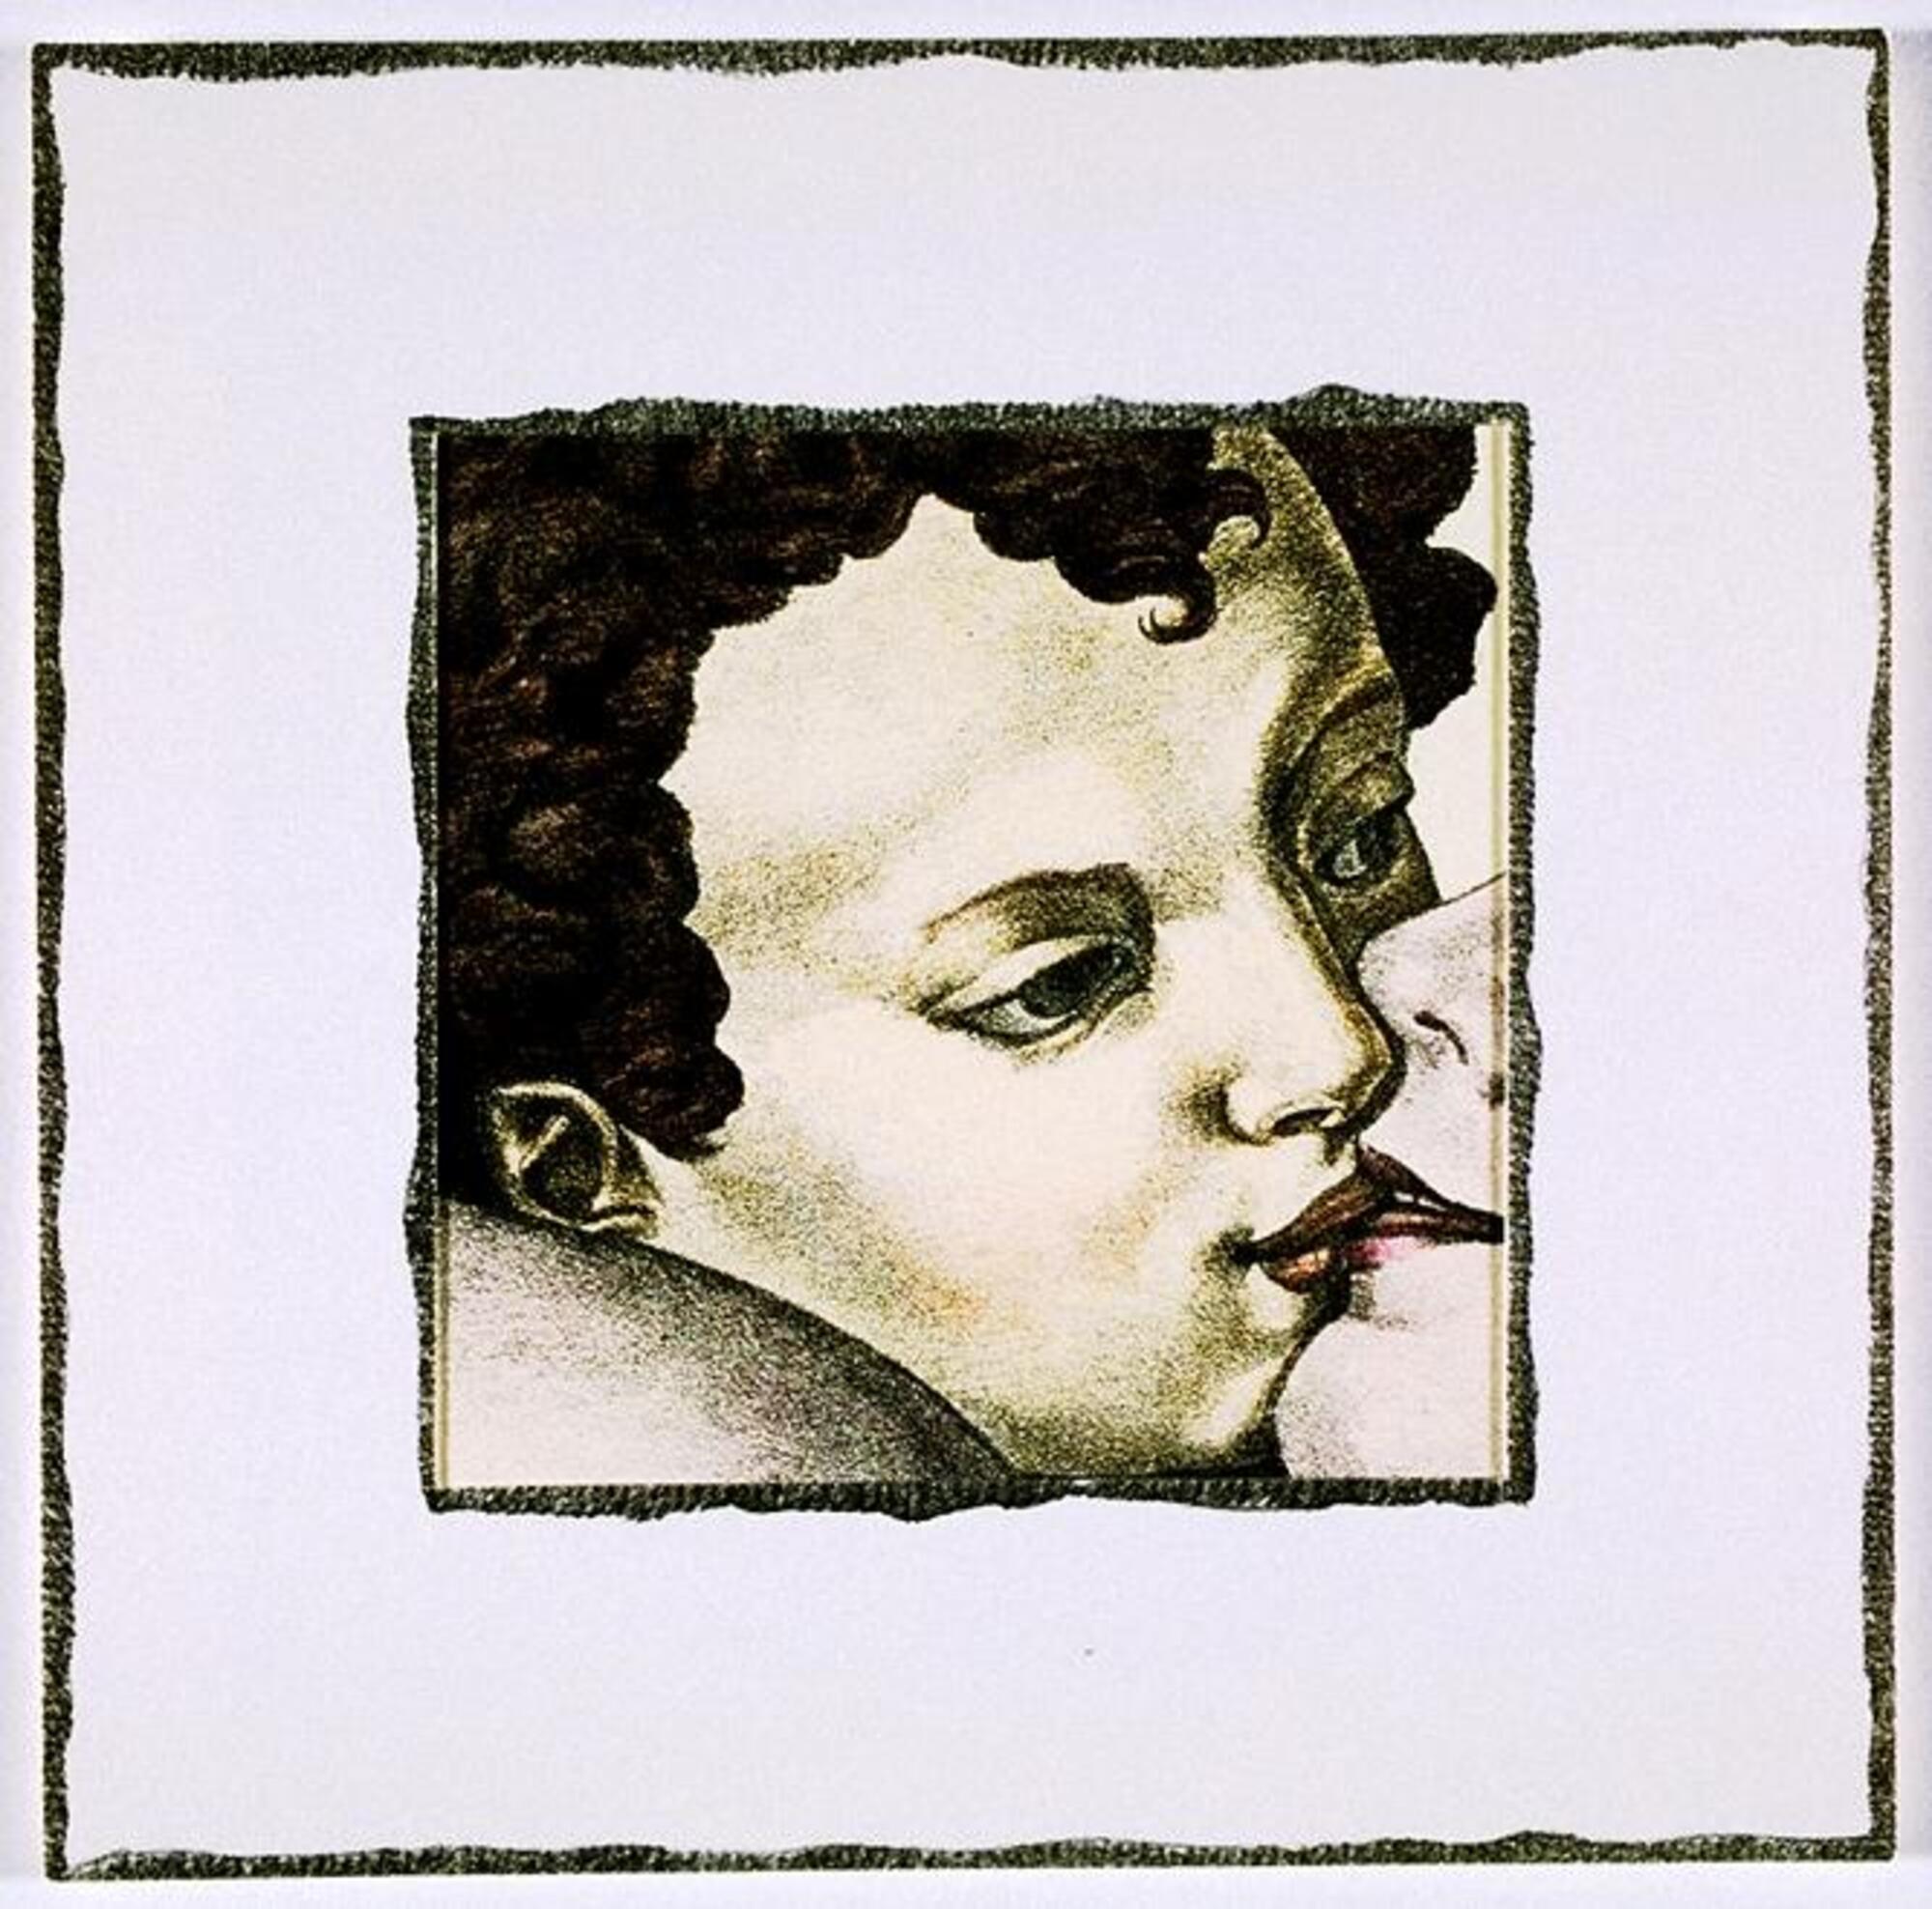 This print shows a young boy, nearly in profile, kissing another figure with feminine lips.